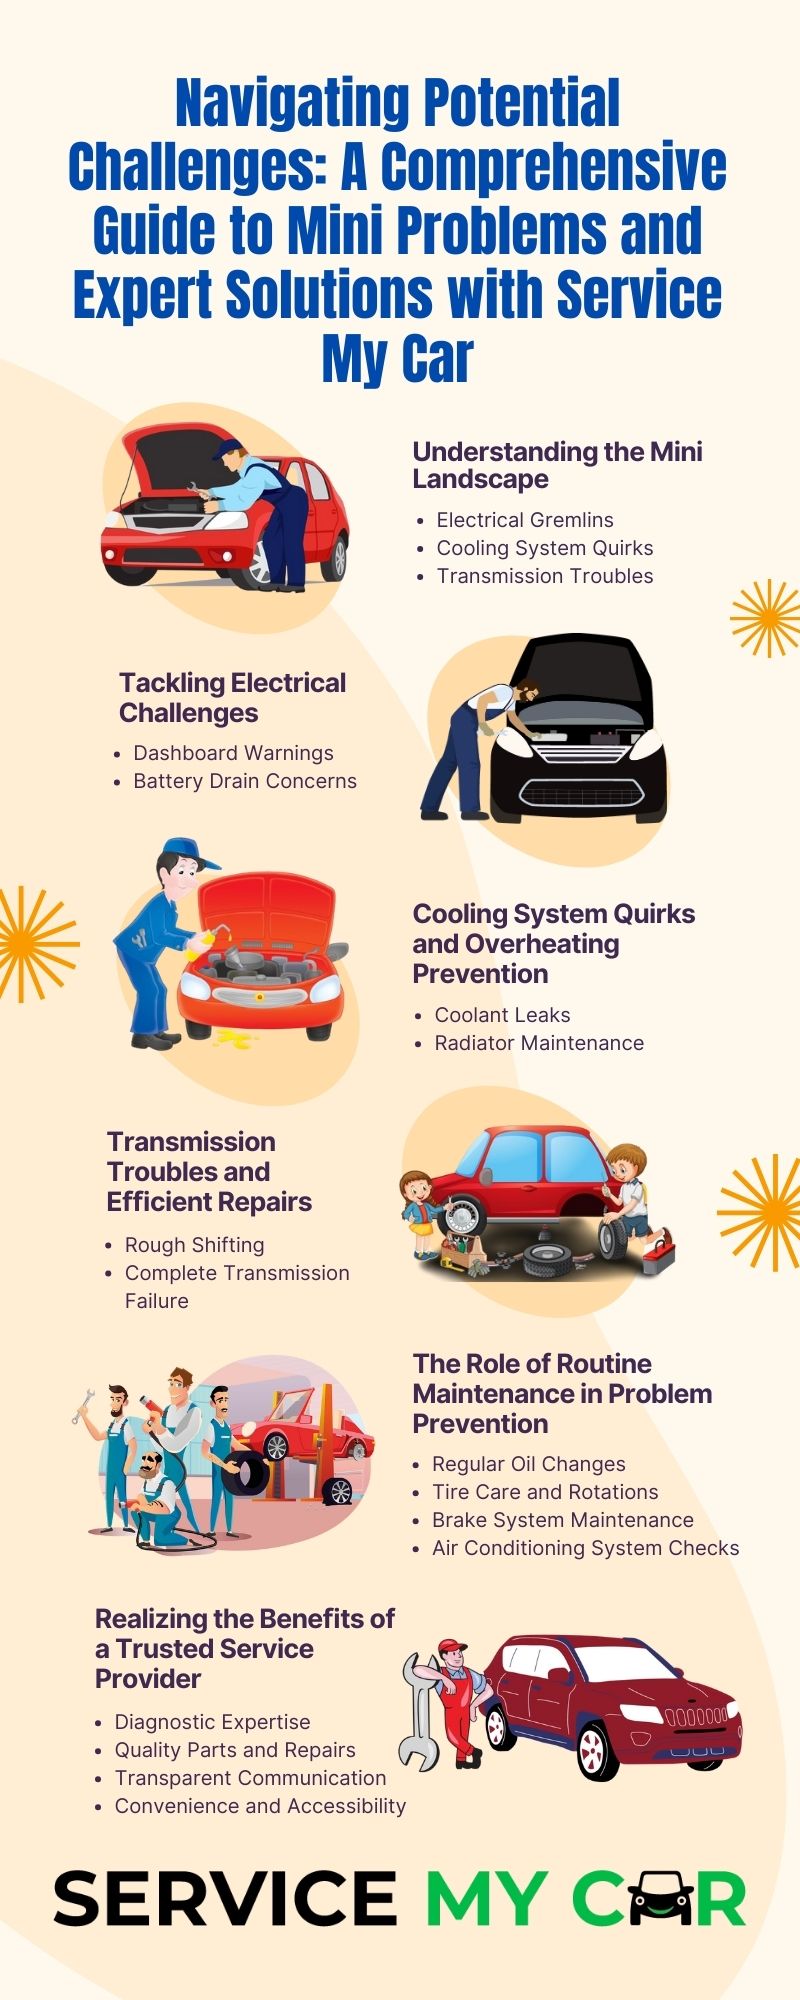 Navigating Potential Challenges: A Comprehensive Guide to Mini Problems and Expert Solutions with Service My Car